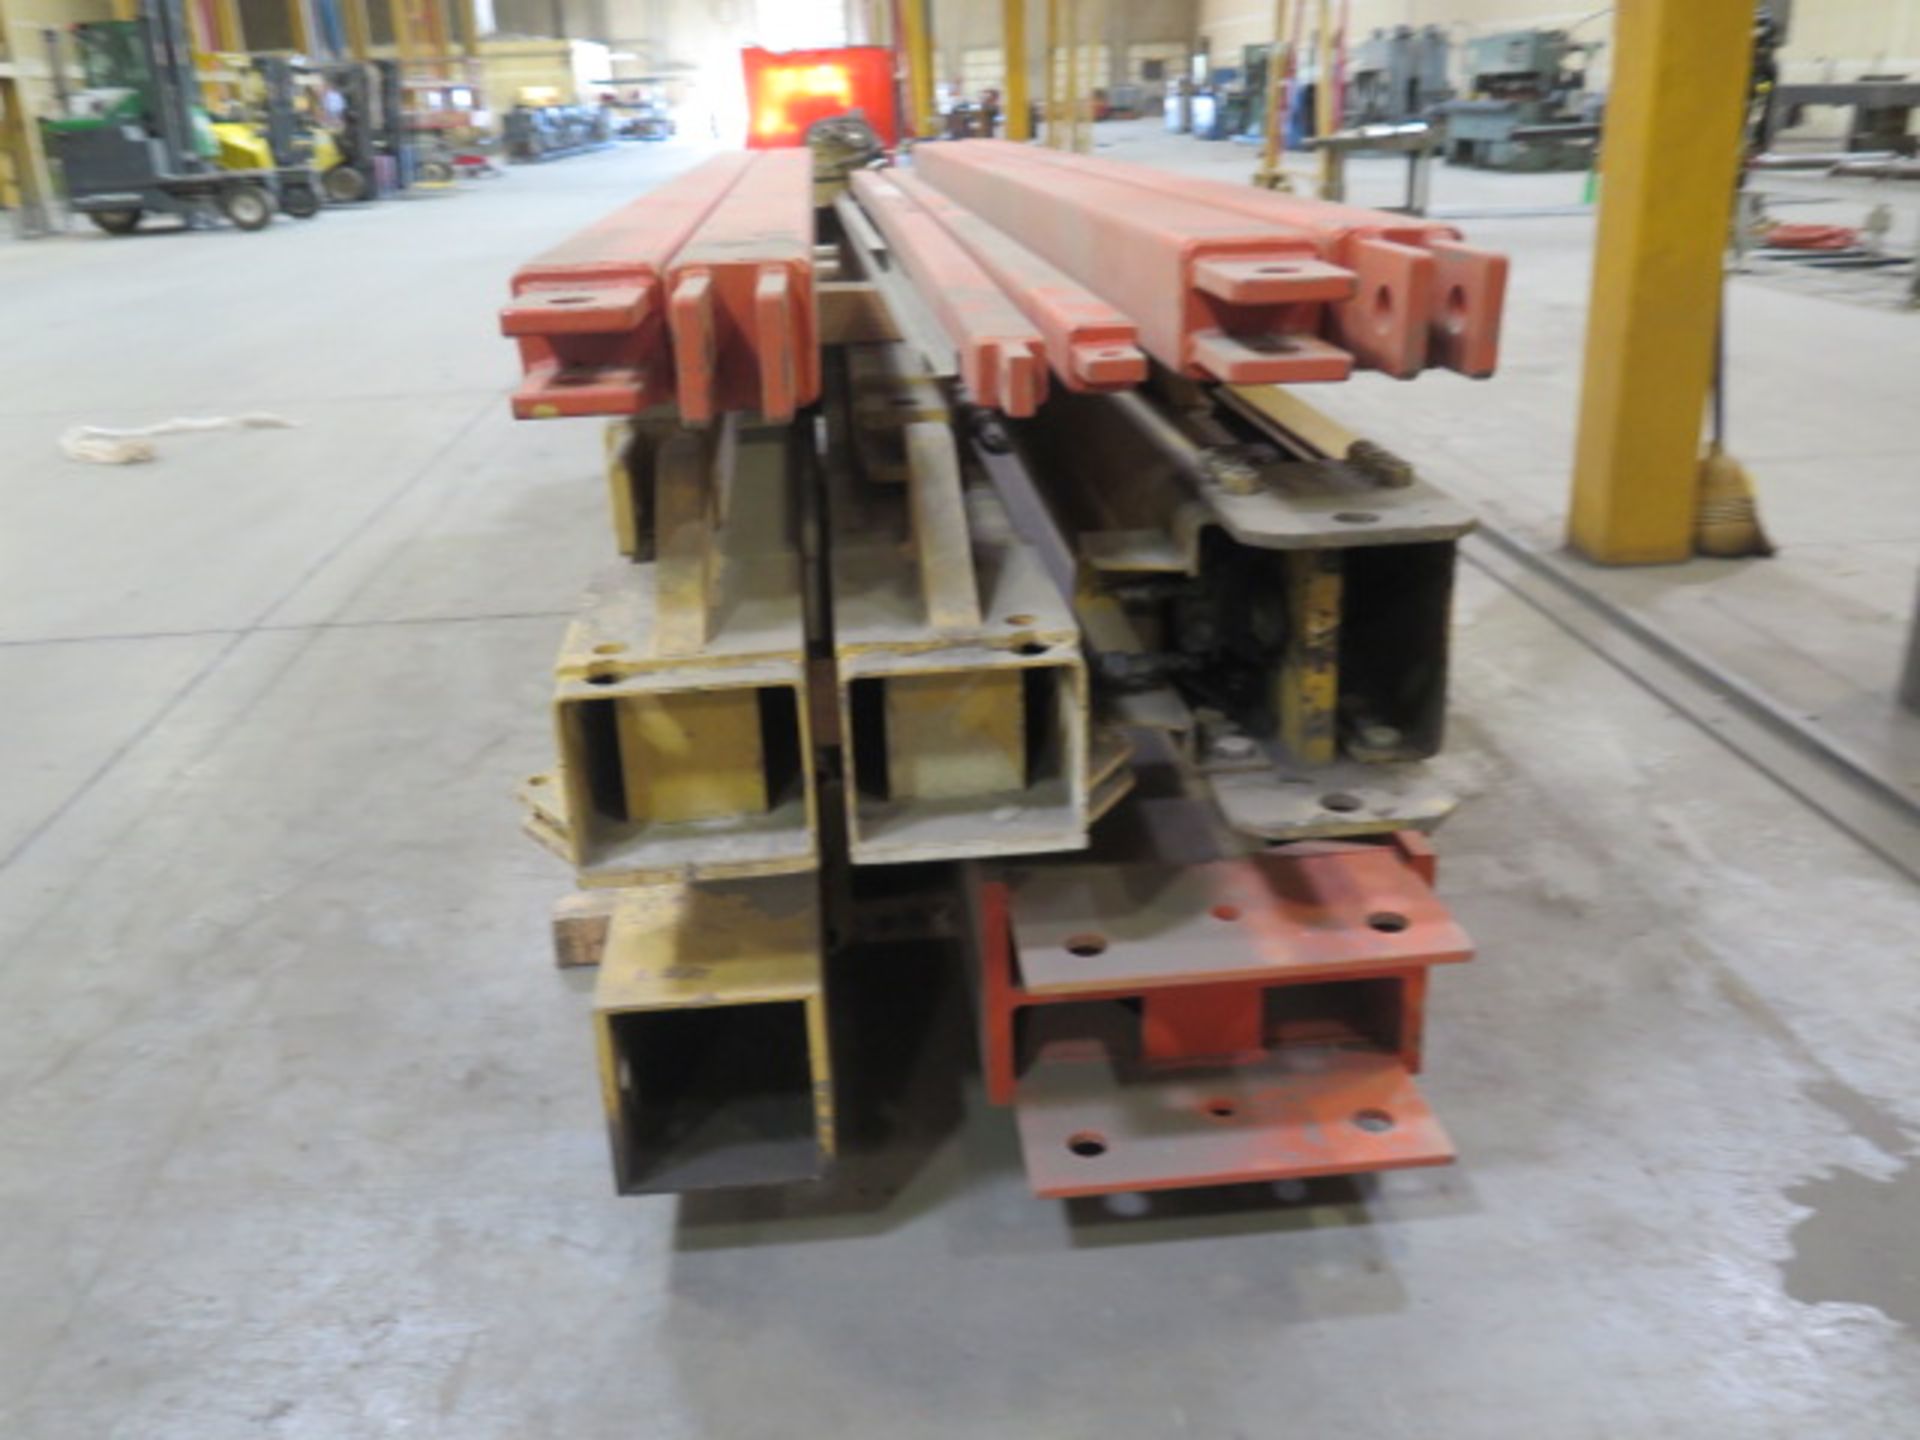 50 Ton Hydraulic Gantry Machinery Lift (SOLD AS-IS - NO WATRRANTY) - Image 6 of 20